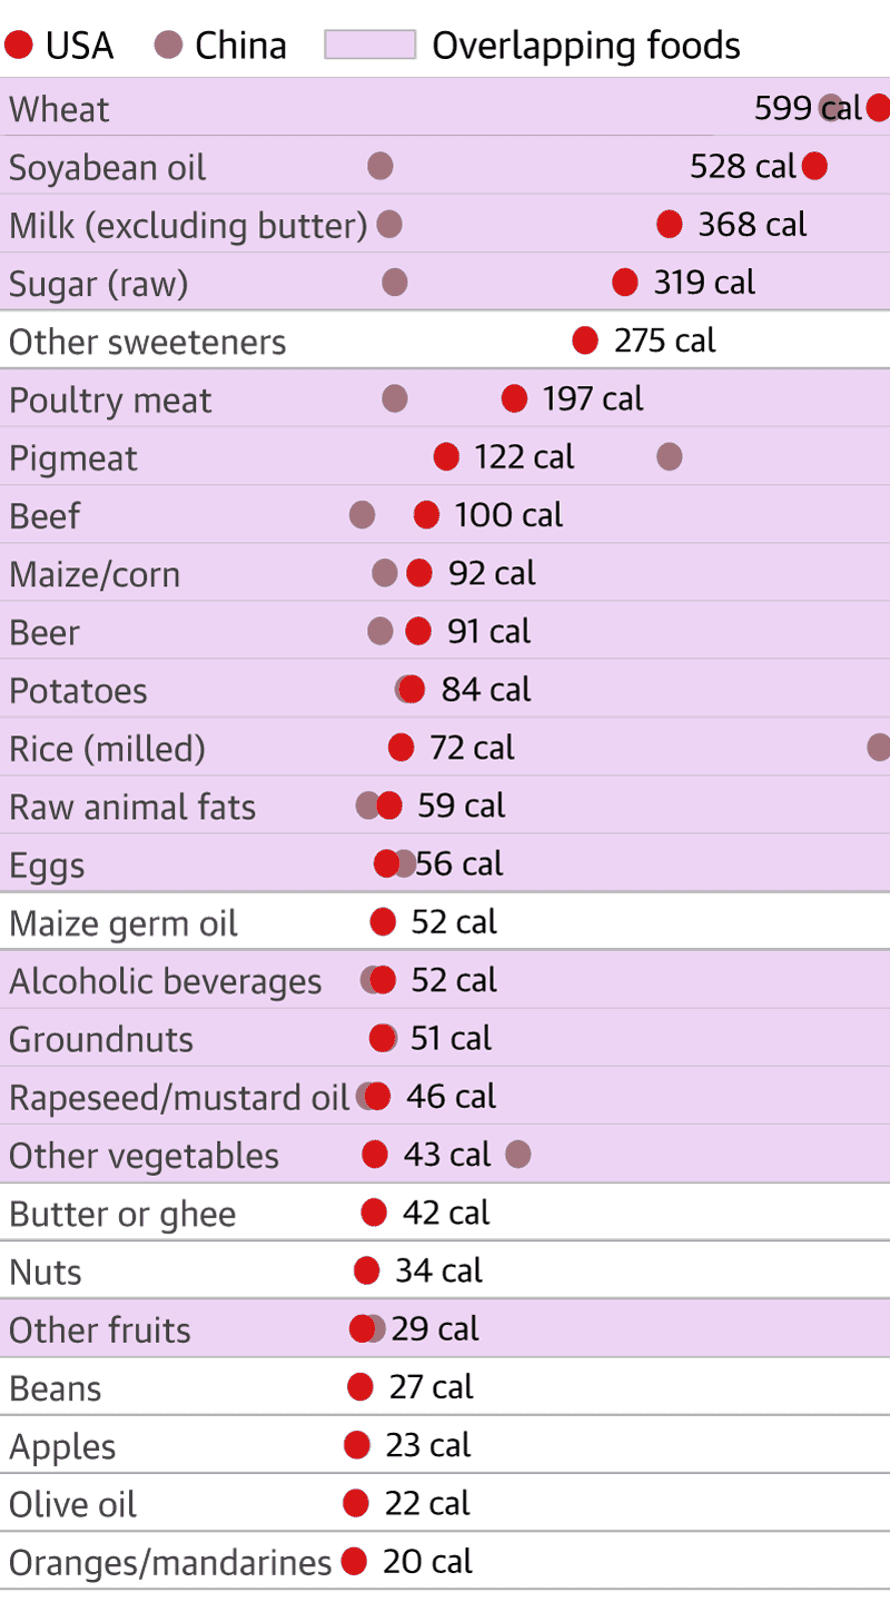 A list showing food items in 2013 that accounted for 20 or more calories per day in the US and China.  The number of pink-highlighted overlapping foods is significantly longer: wheat, soya bean oil, milk (excluding butter), sugar (raw), poultry meat, pigmeat, beef, maize/corn, beer, potatoes, rice (milled), raw animal fats, eggs, alcoholic beverages, groundnuts, rapeseed/mustard oil, other vegetables, other fruits